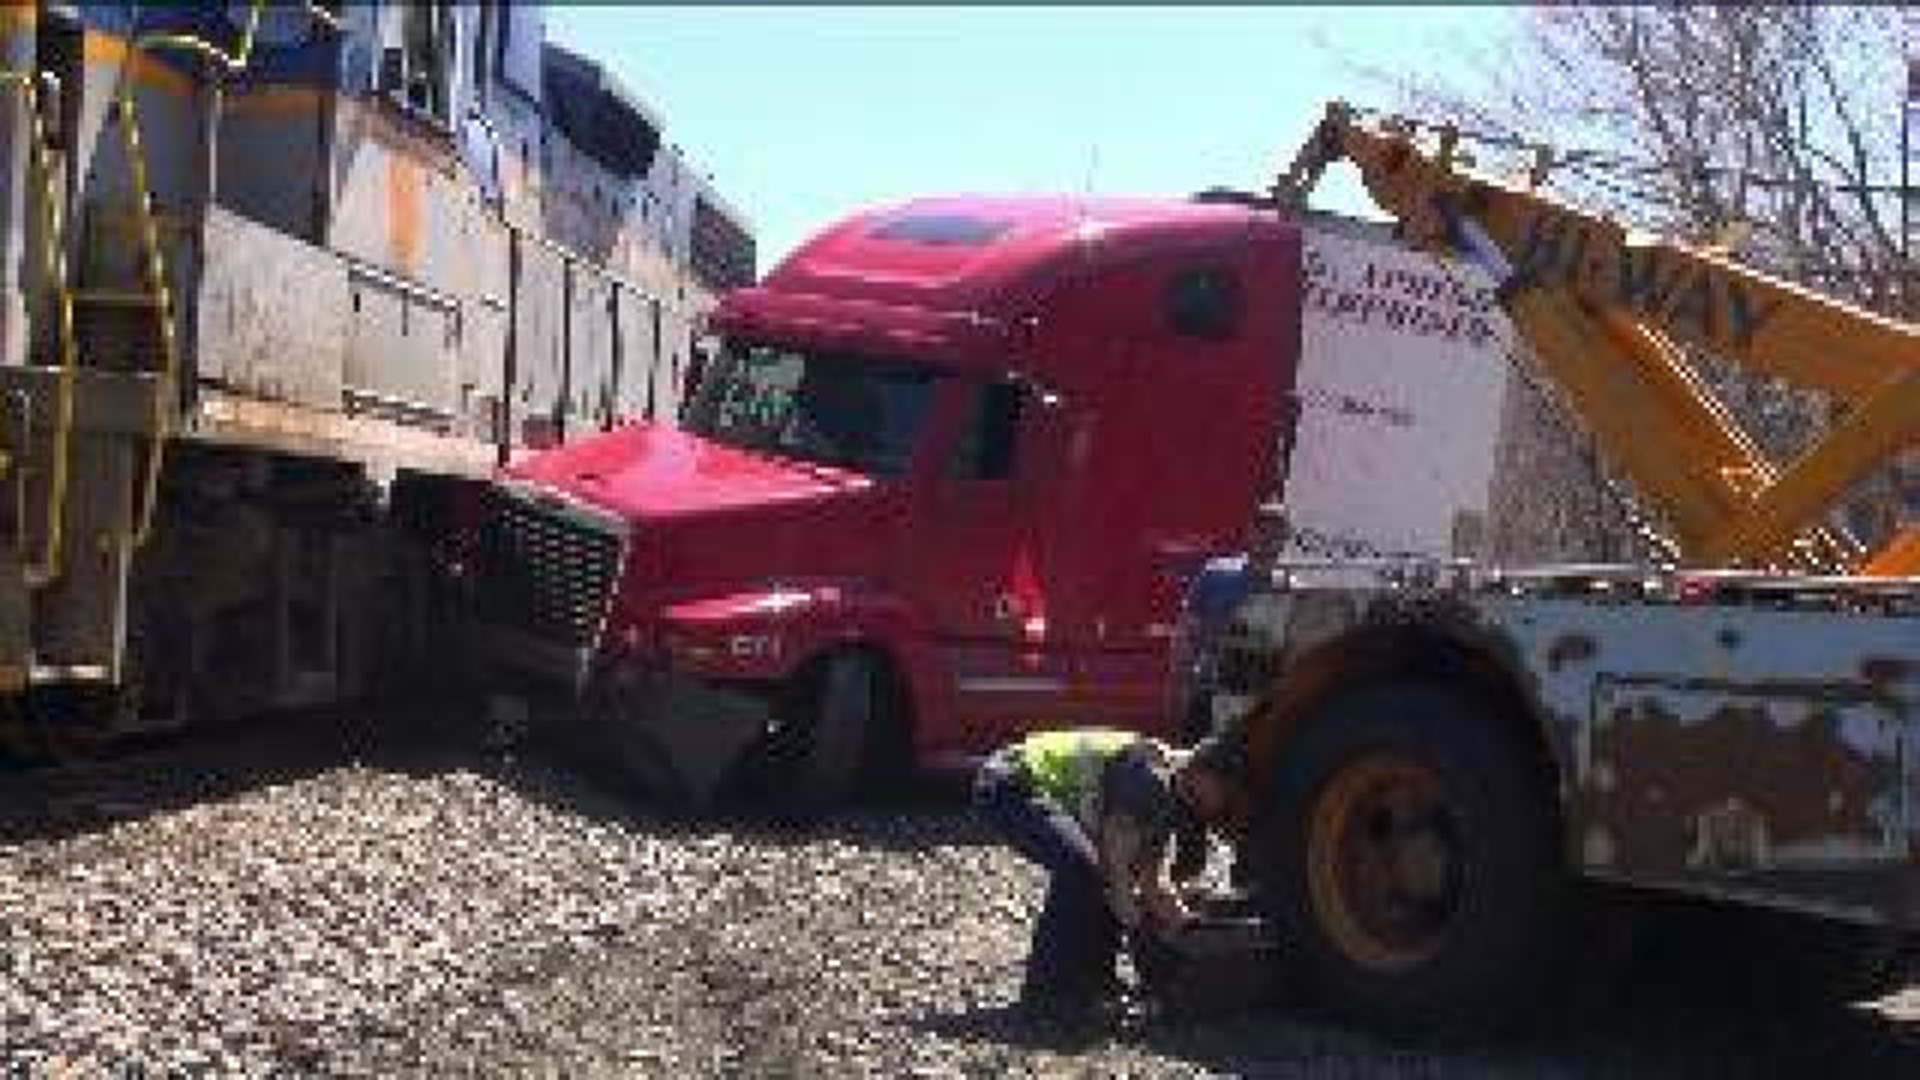 Train, Rig Collide At Luzerne County Crossing